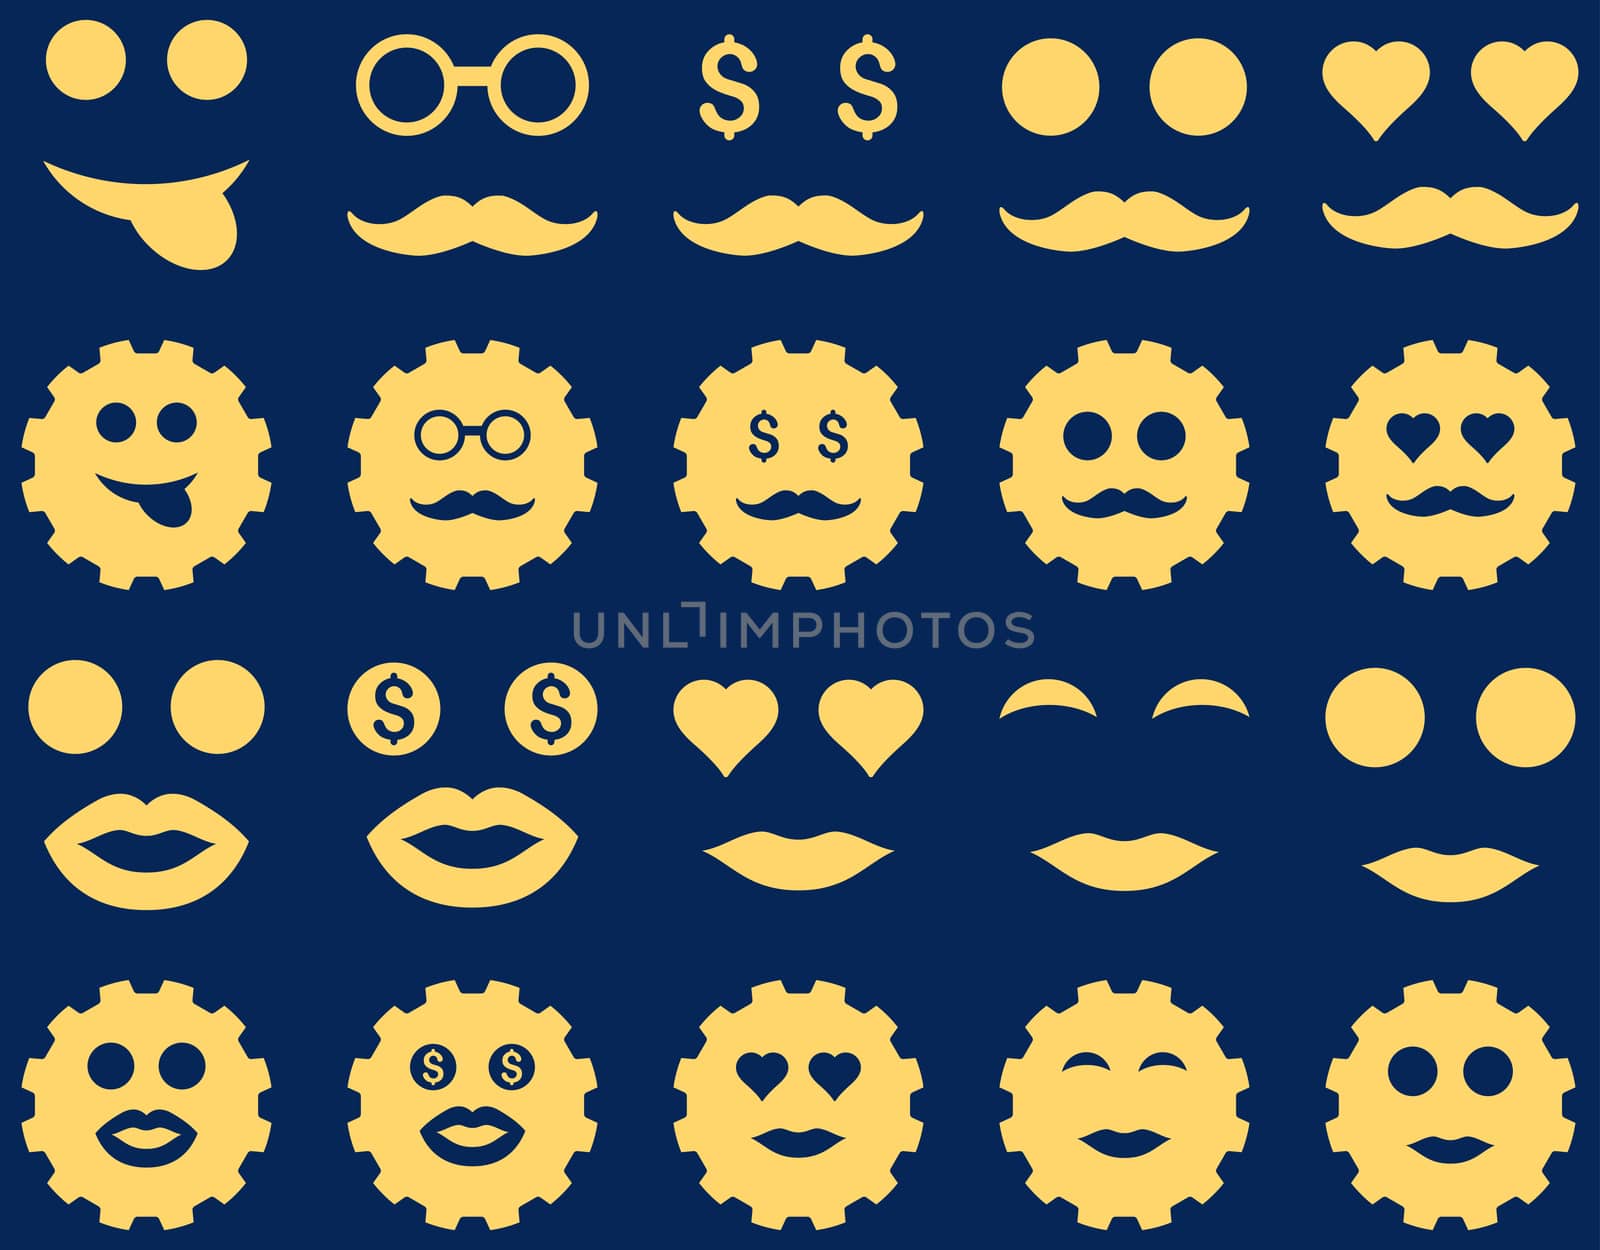 Tool, gear, smile, emotion icons by ahasoft